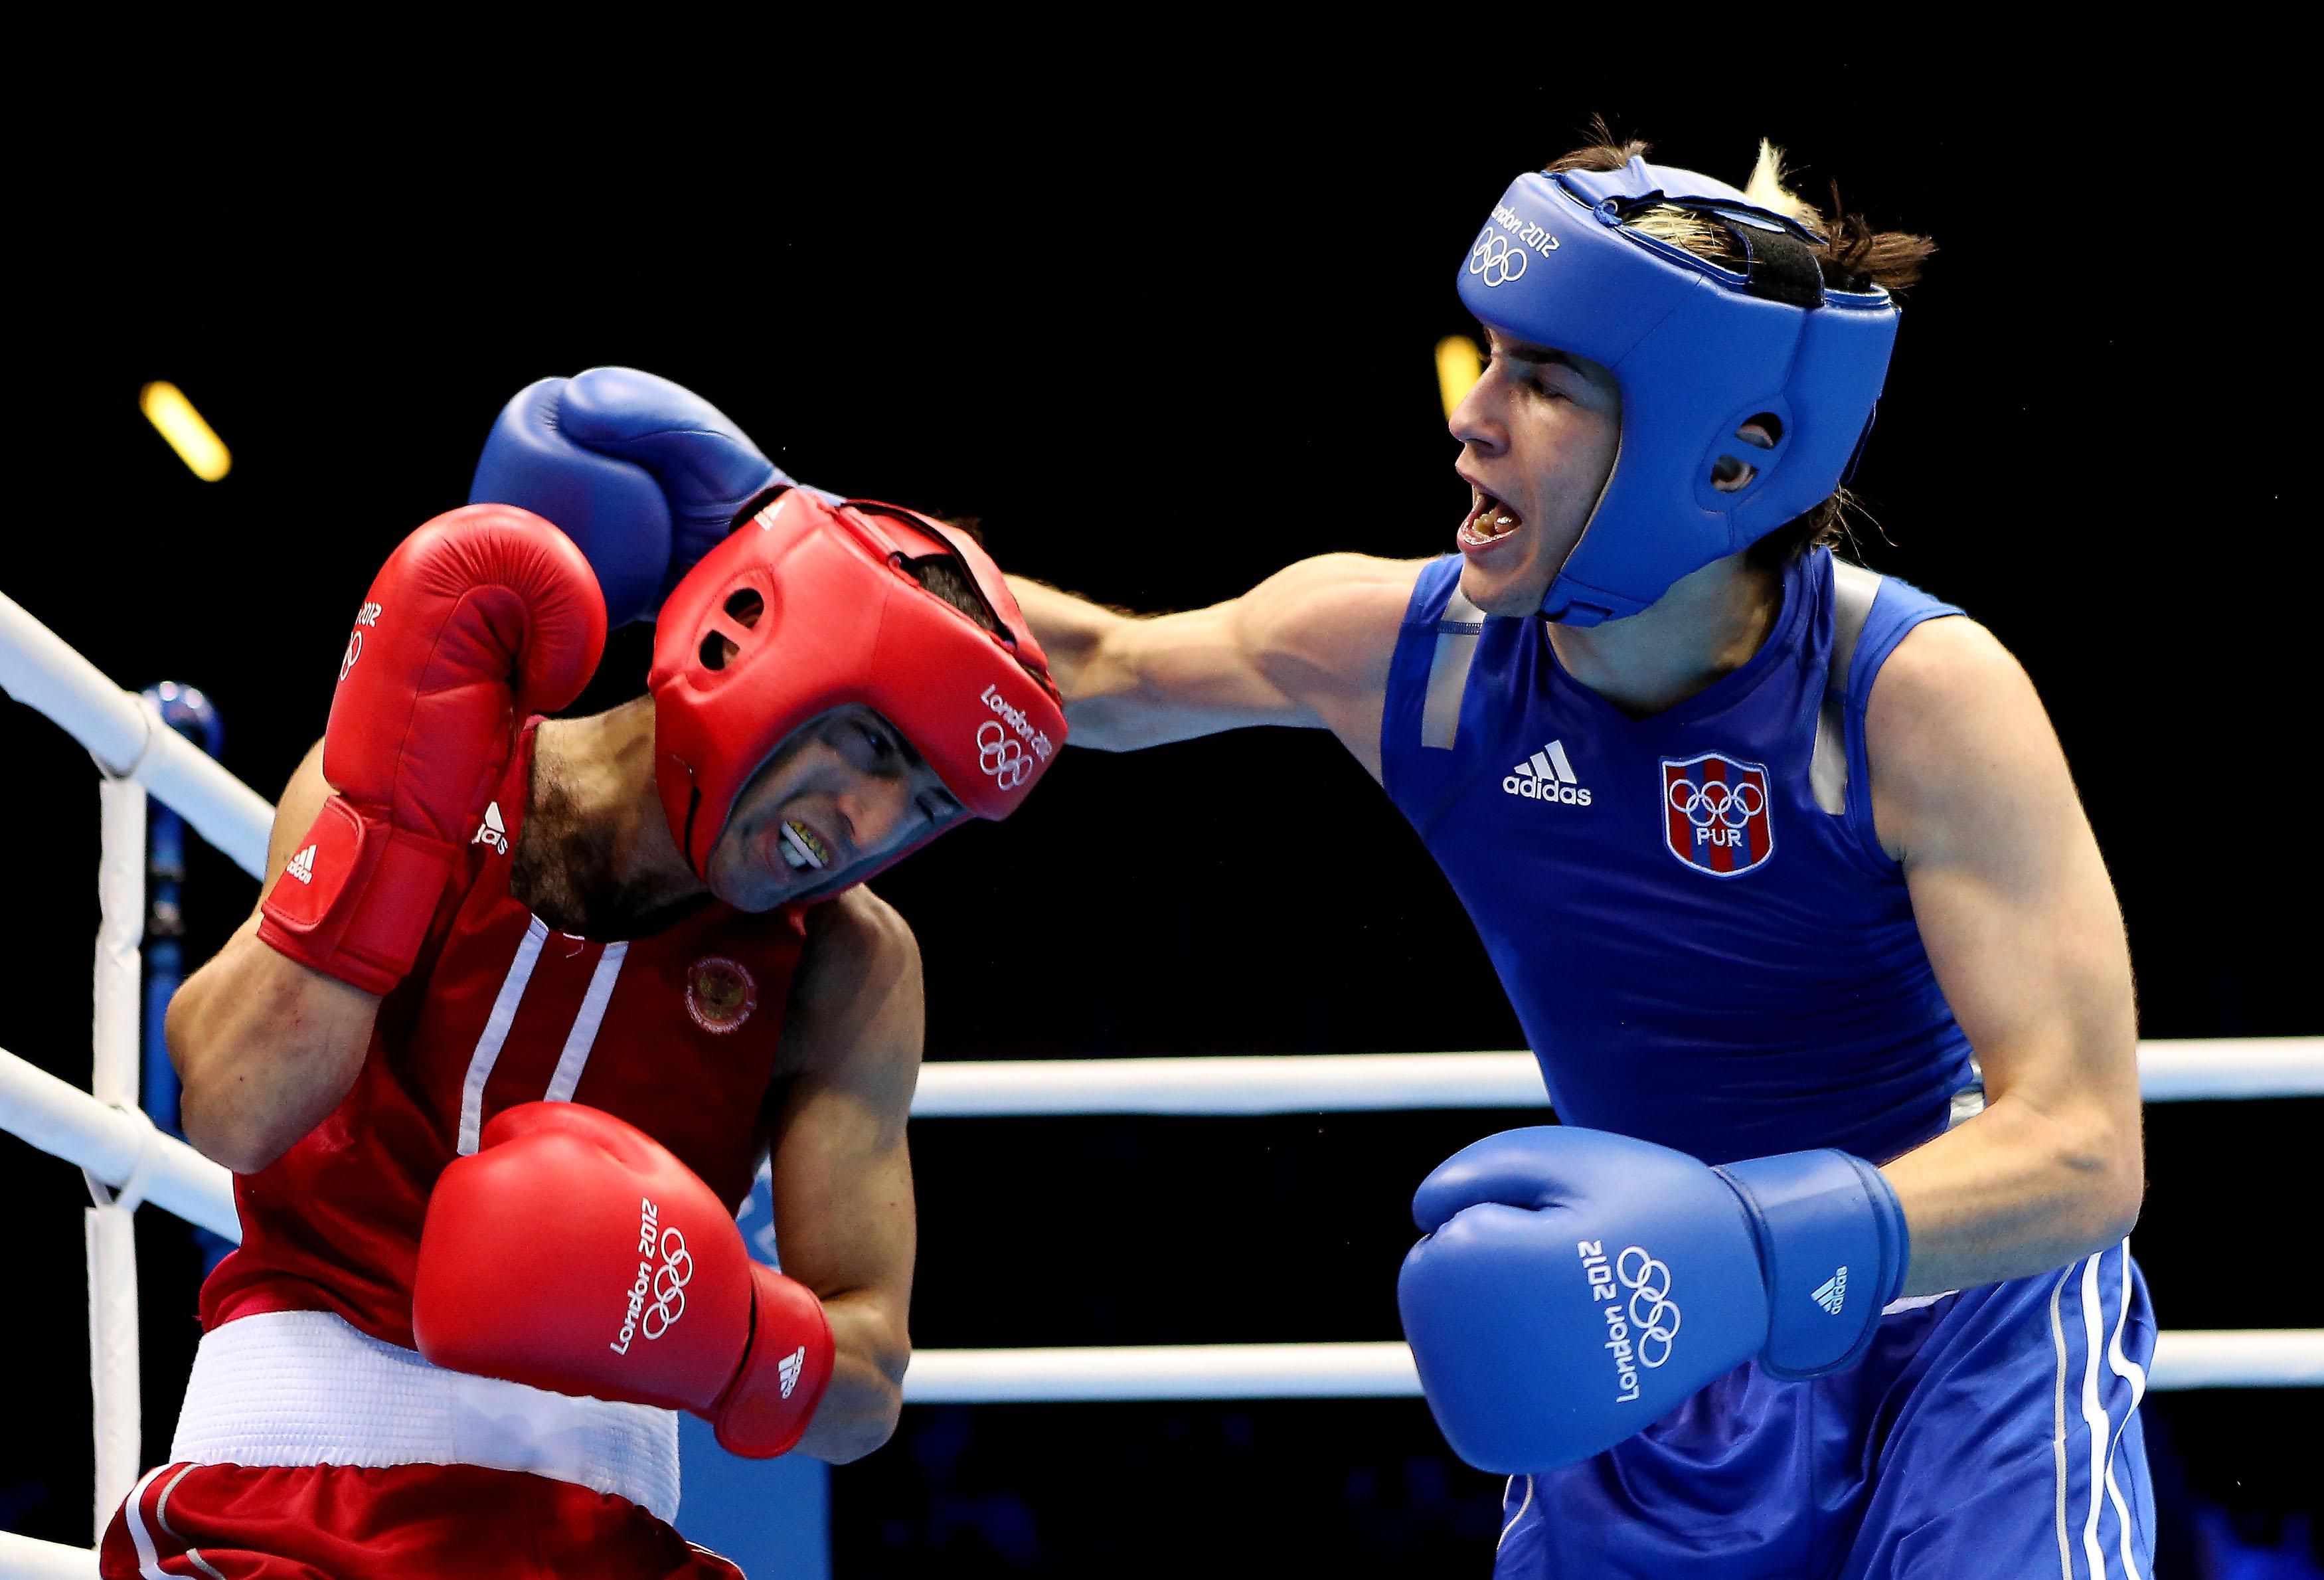 Olympic Boxing - What Is It?